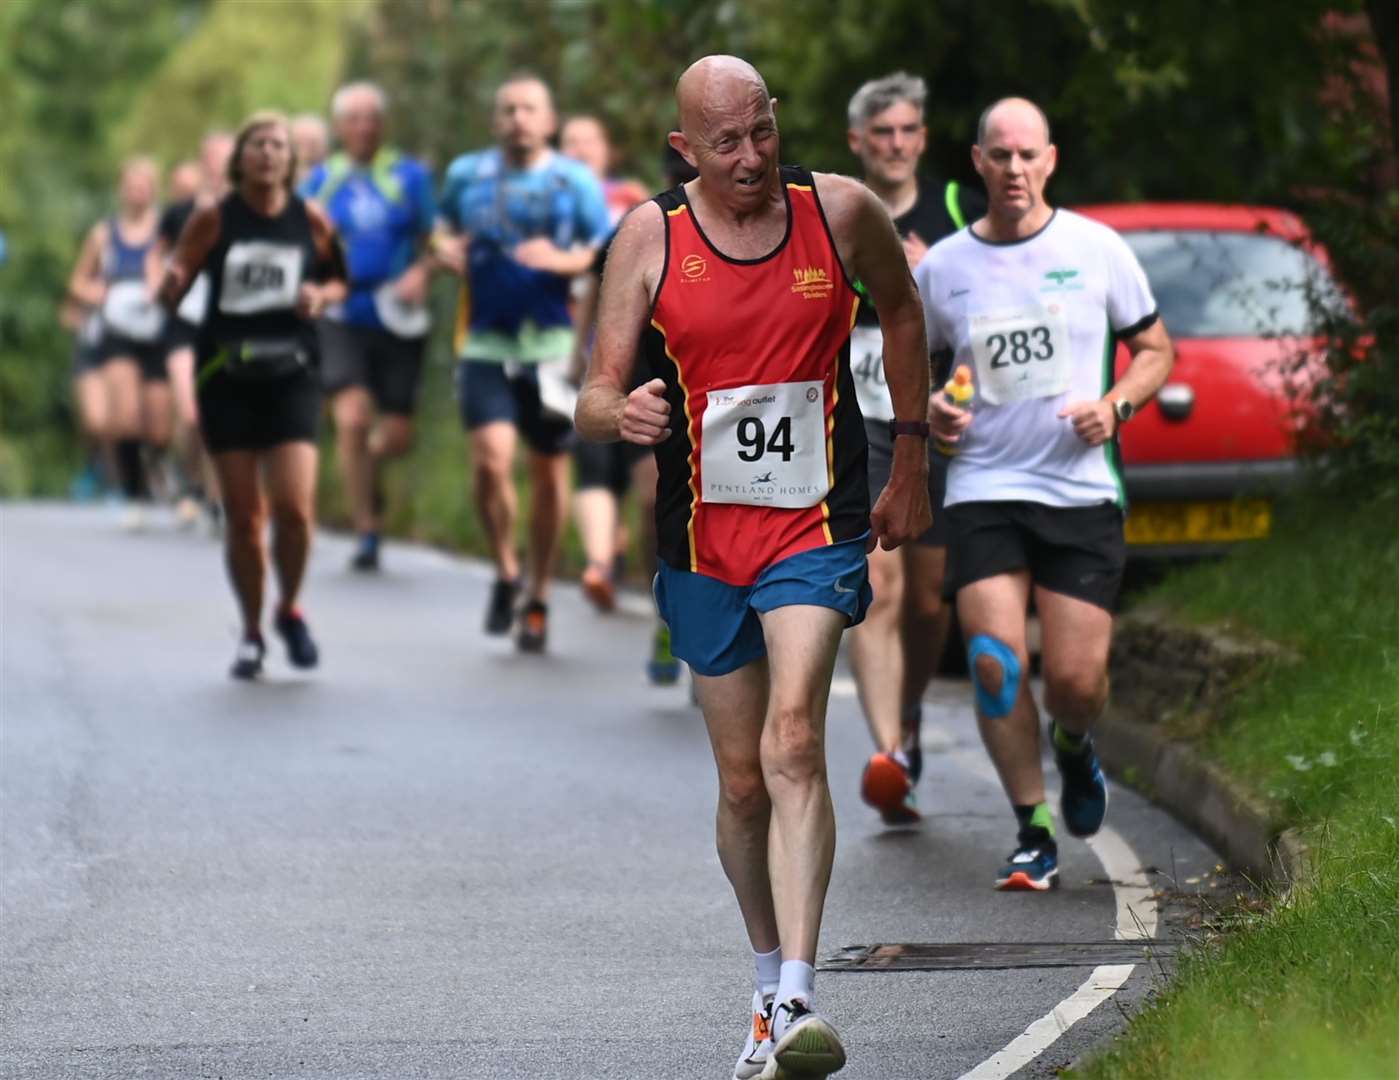 Clive Crisp of Sittingbourne Striders. Picture: Barry Goodwin (49790298)